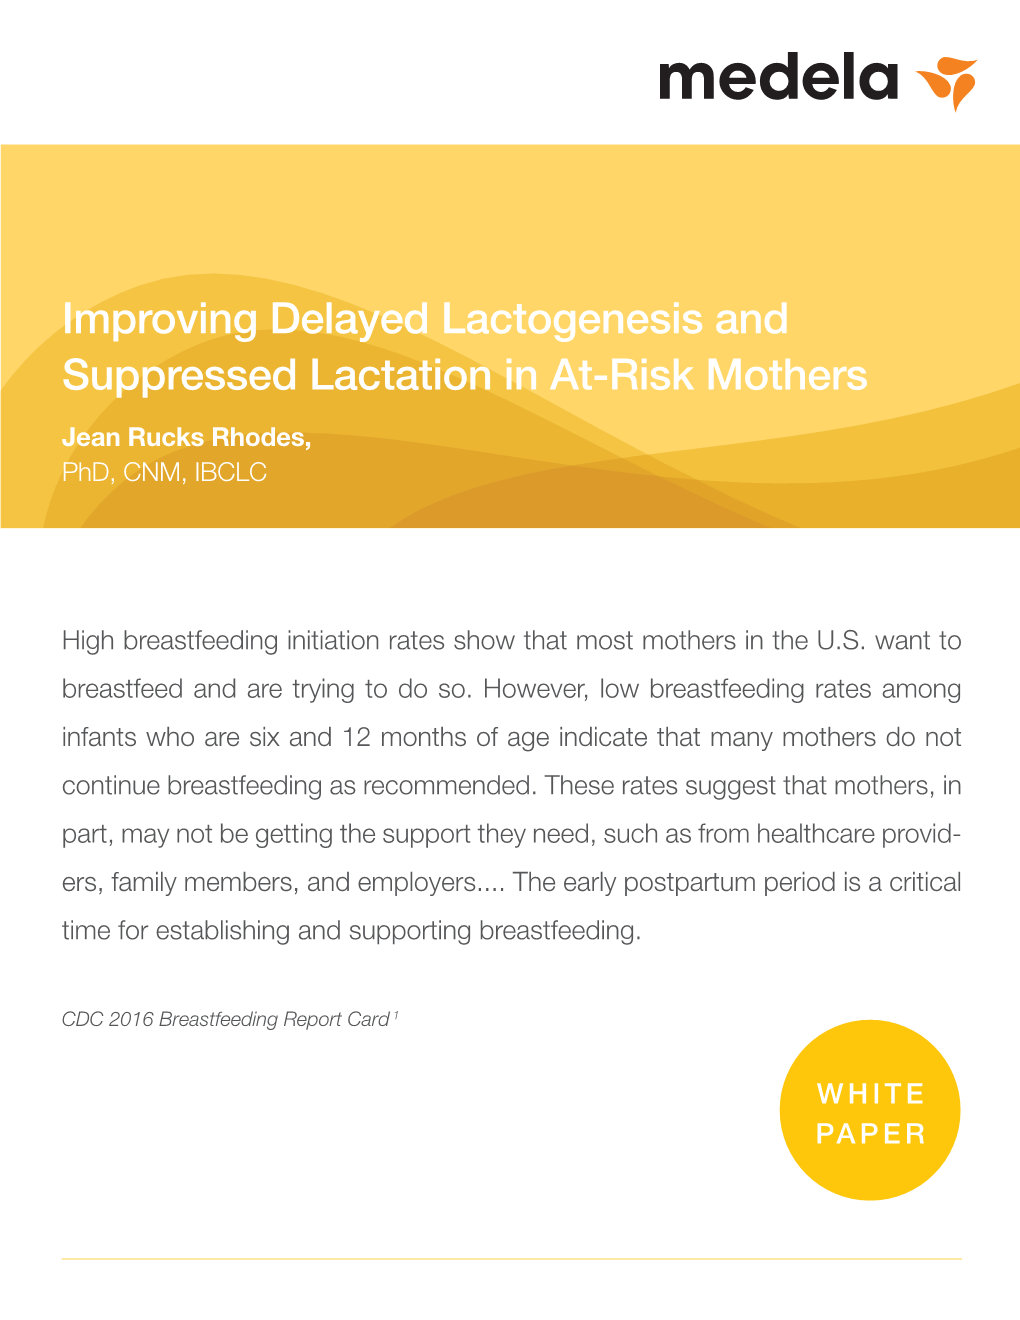 Improving Delayed Lactogenesis and Suppressed Lactation in At-Risk Mothers